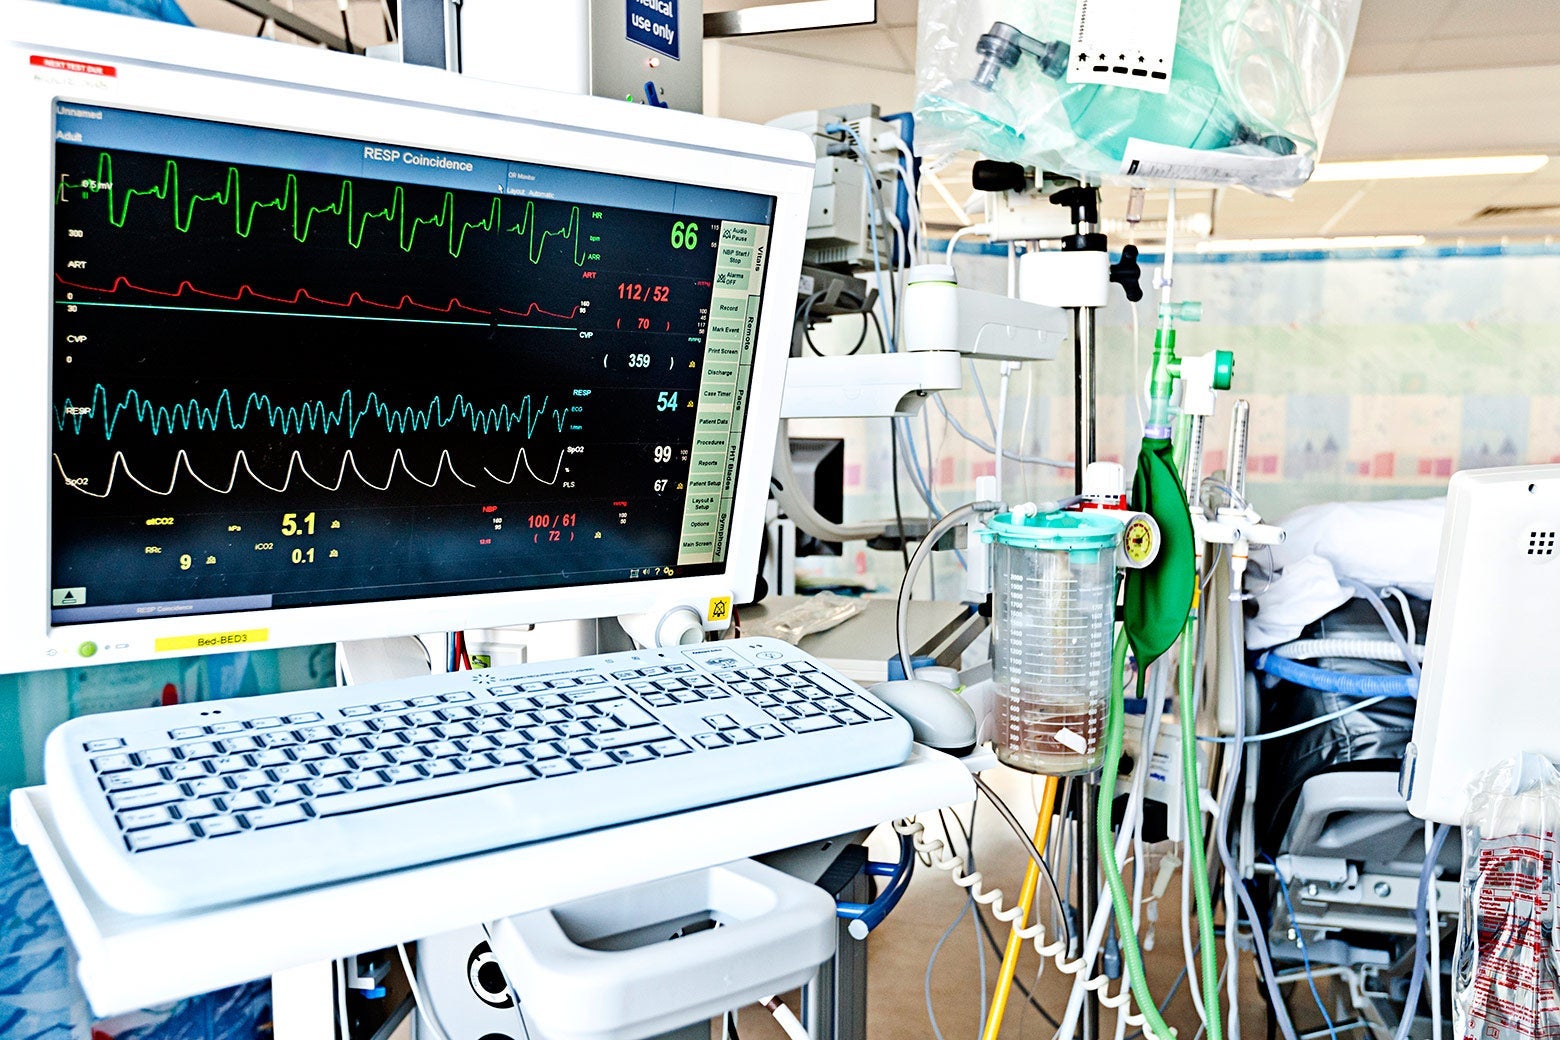 ICU machines and wires